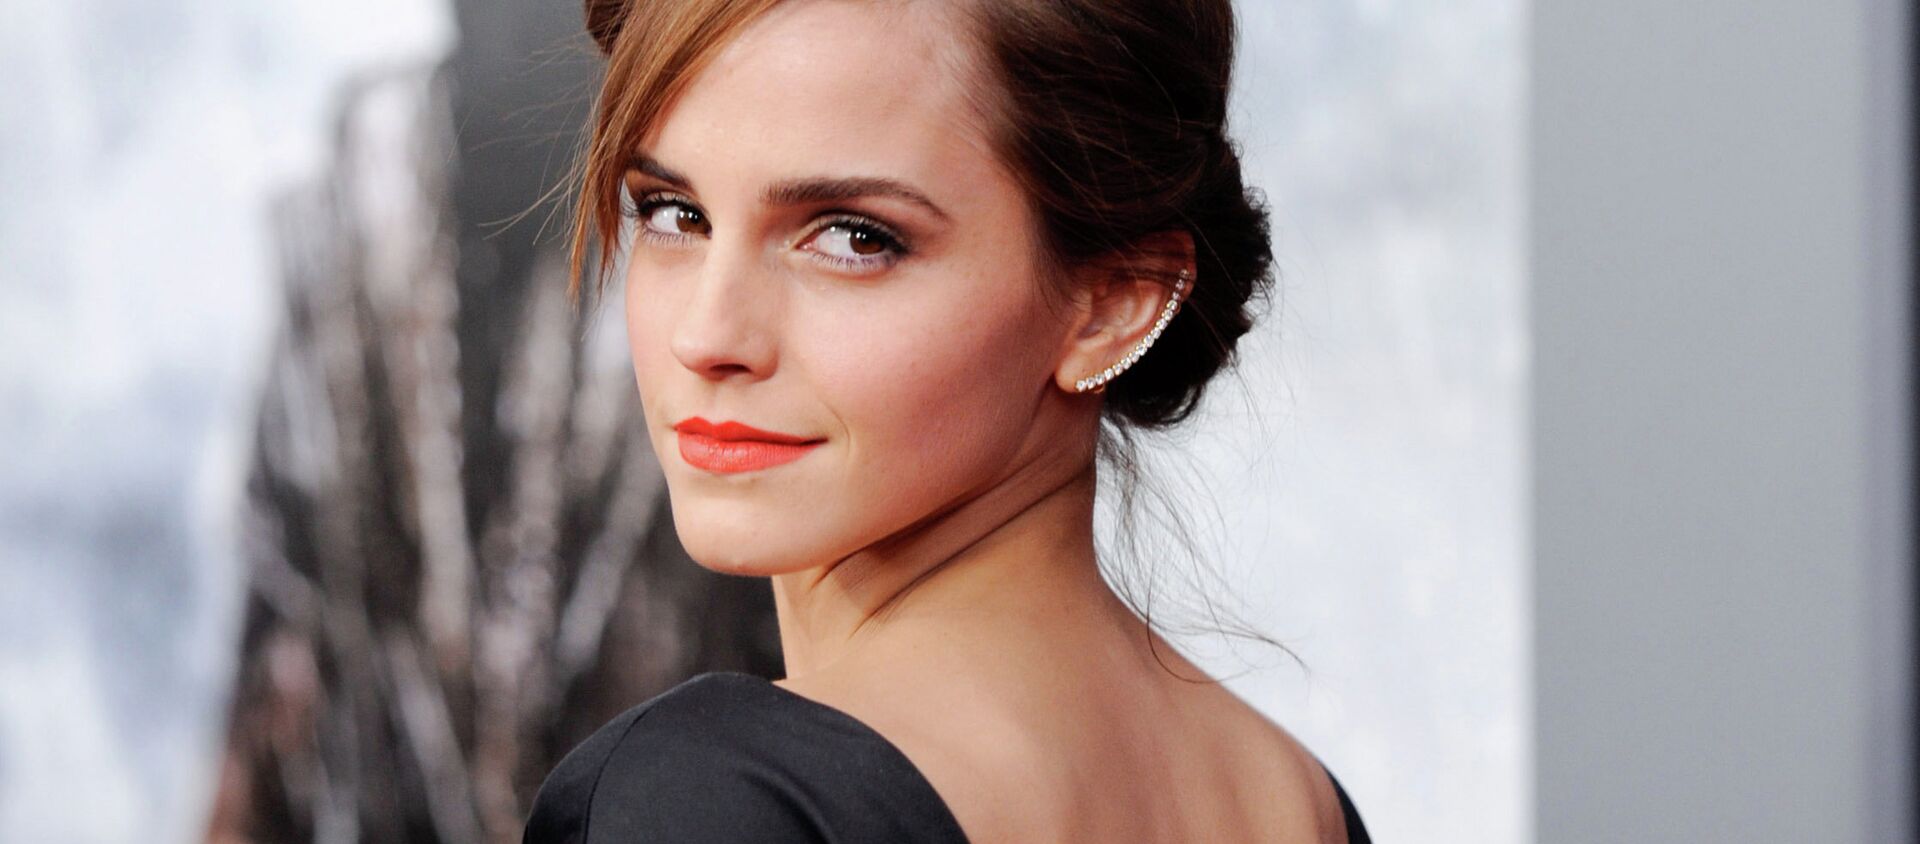 This March 26, 2014 file photo shows actress Emma Watson at the premiere of Noah, in New York - Sputnik 日本, 1920, 25.04.2018